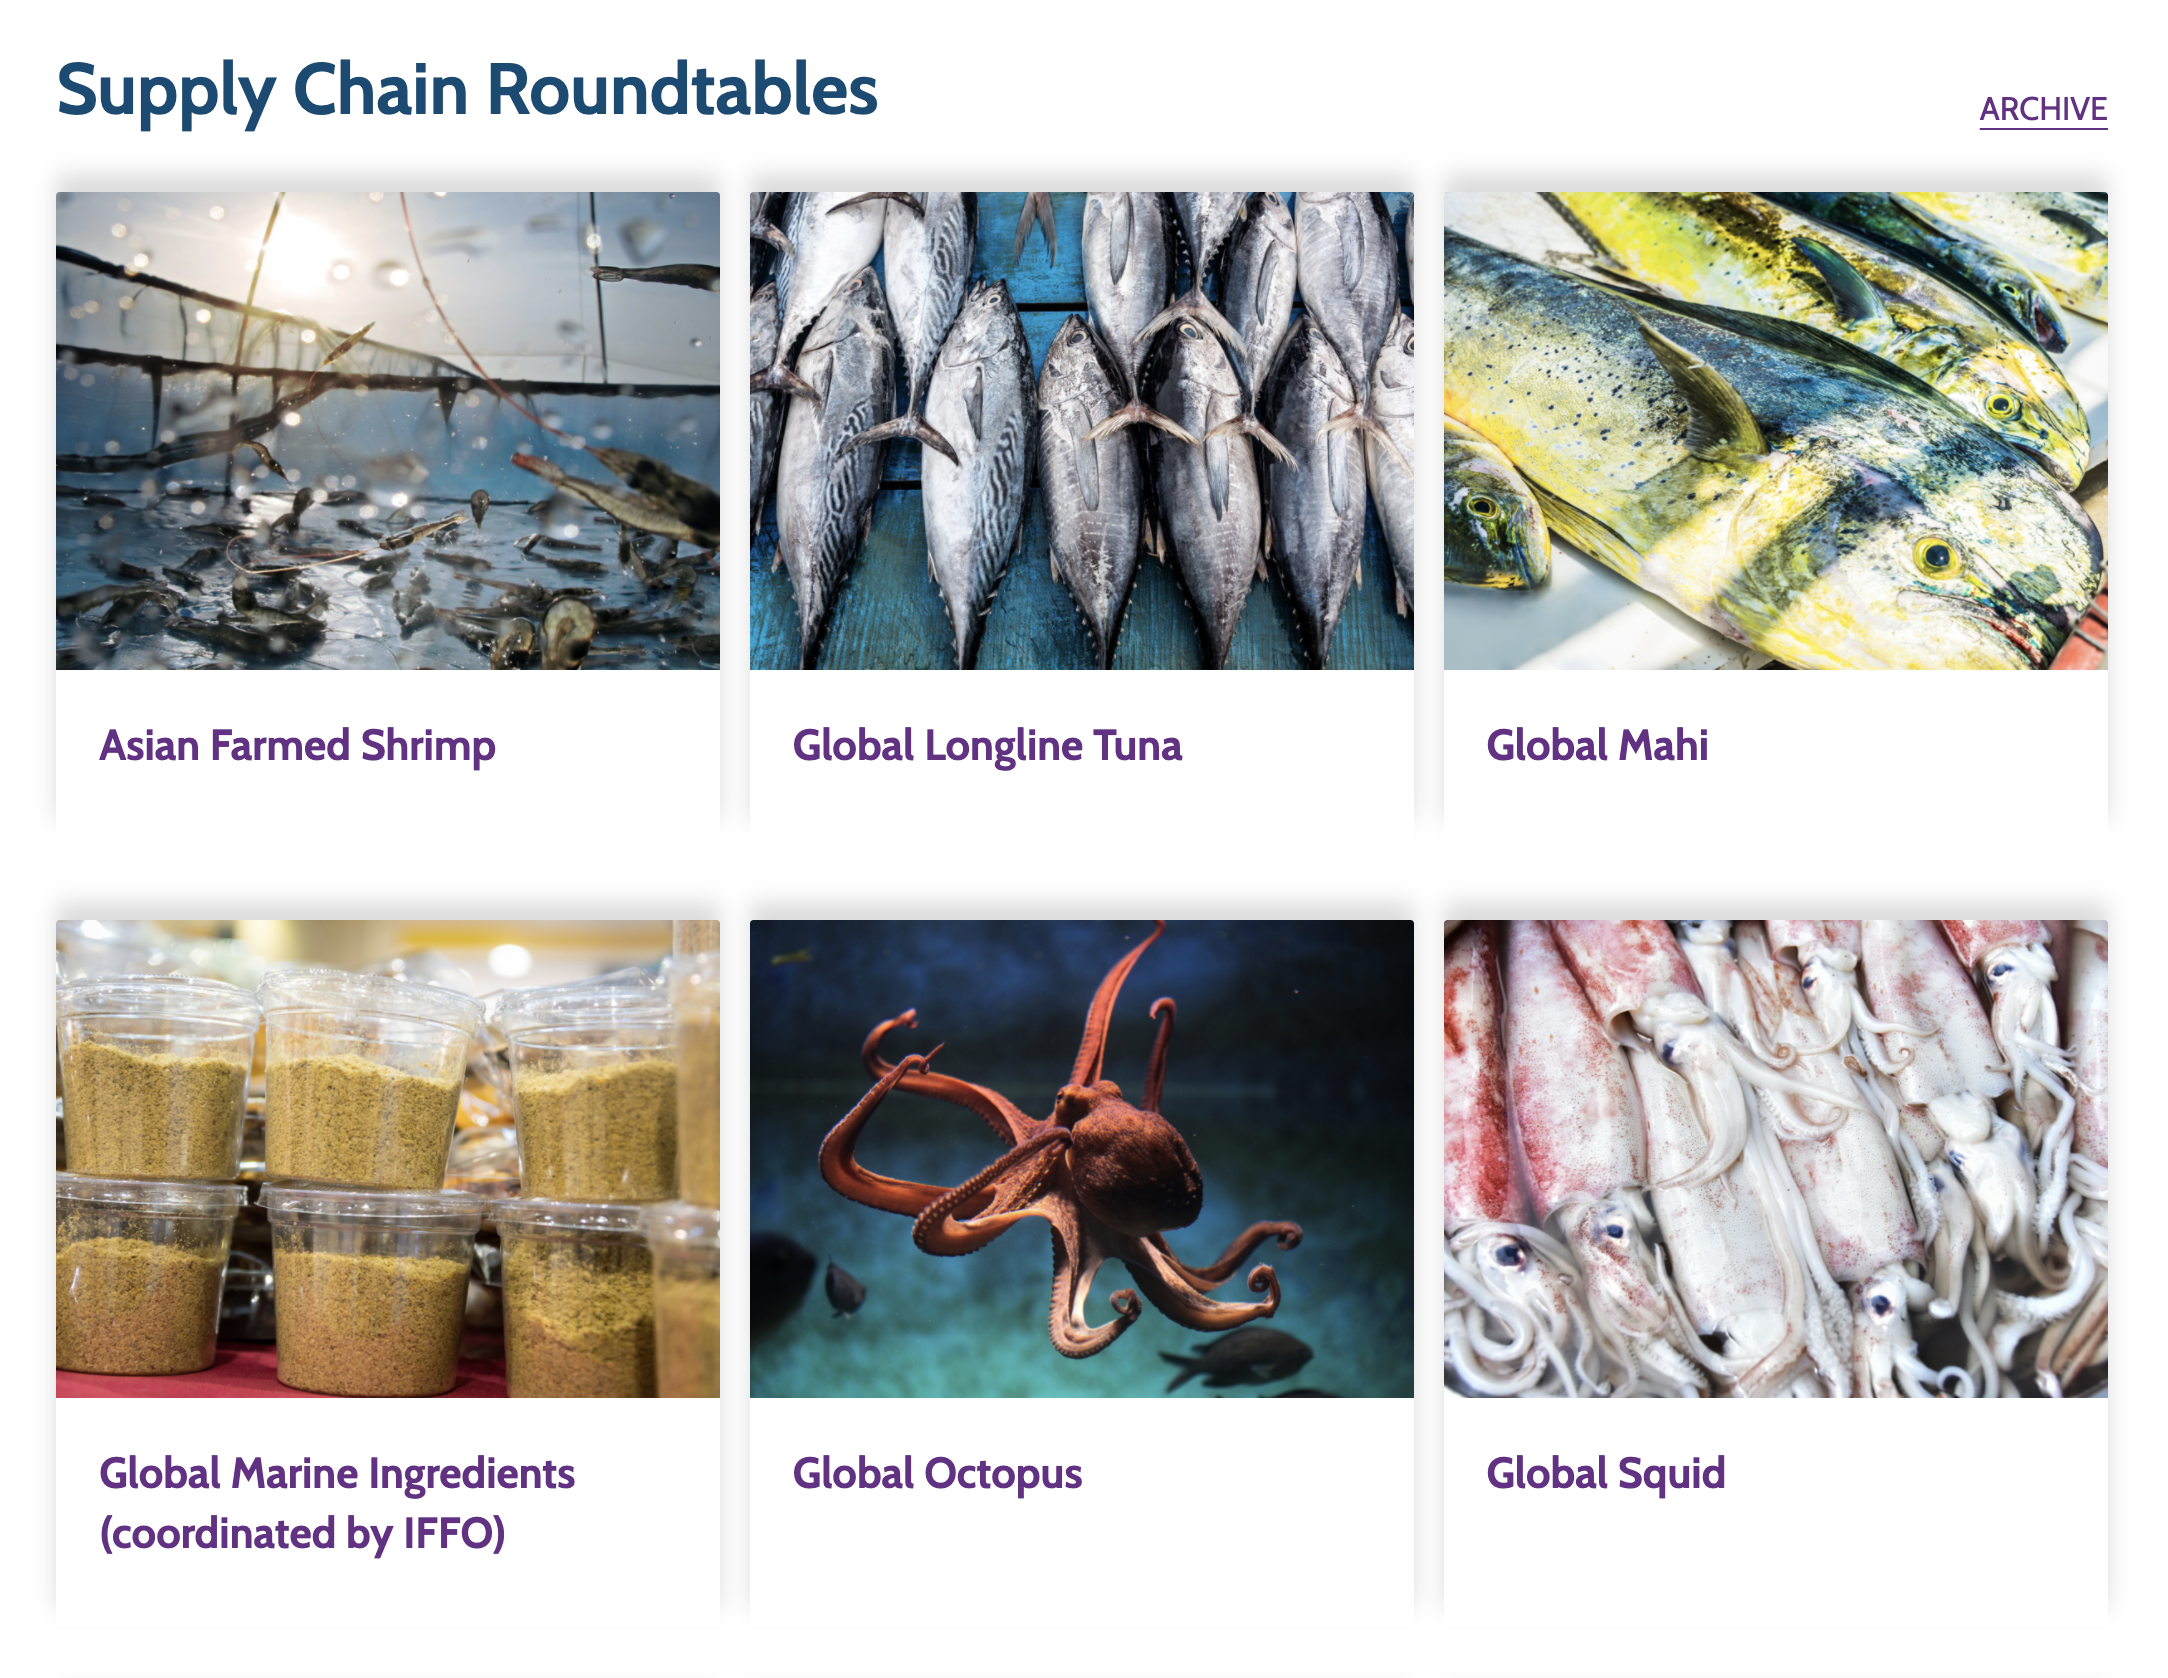 Supply Chain Roundtables